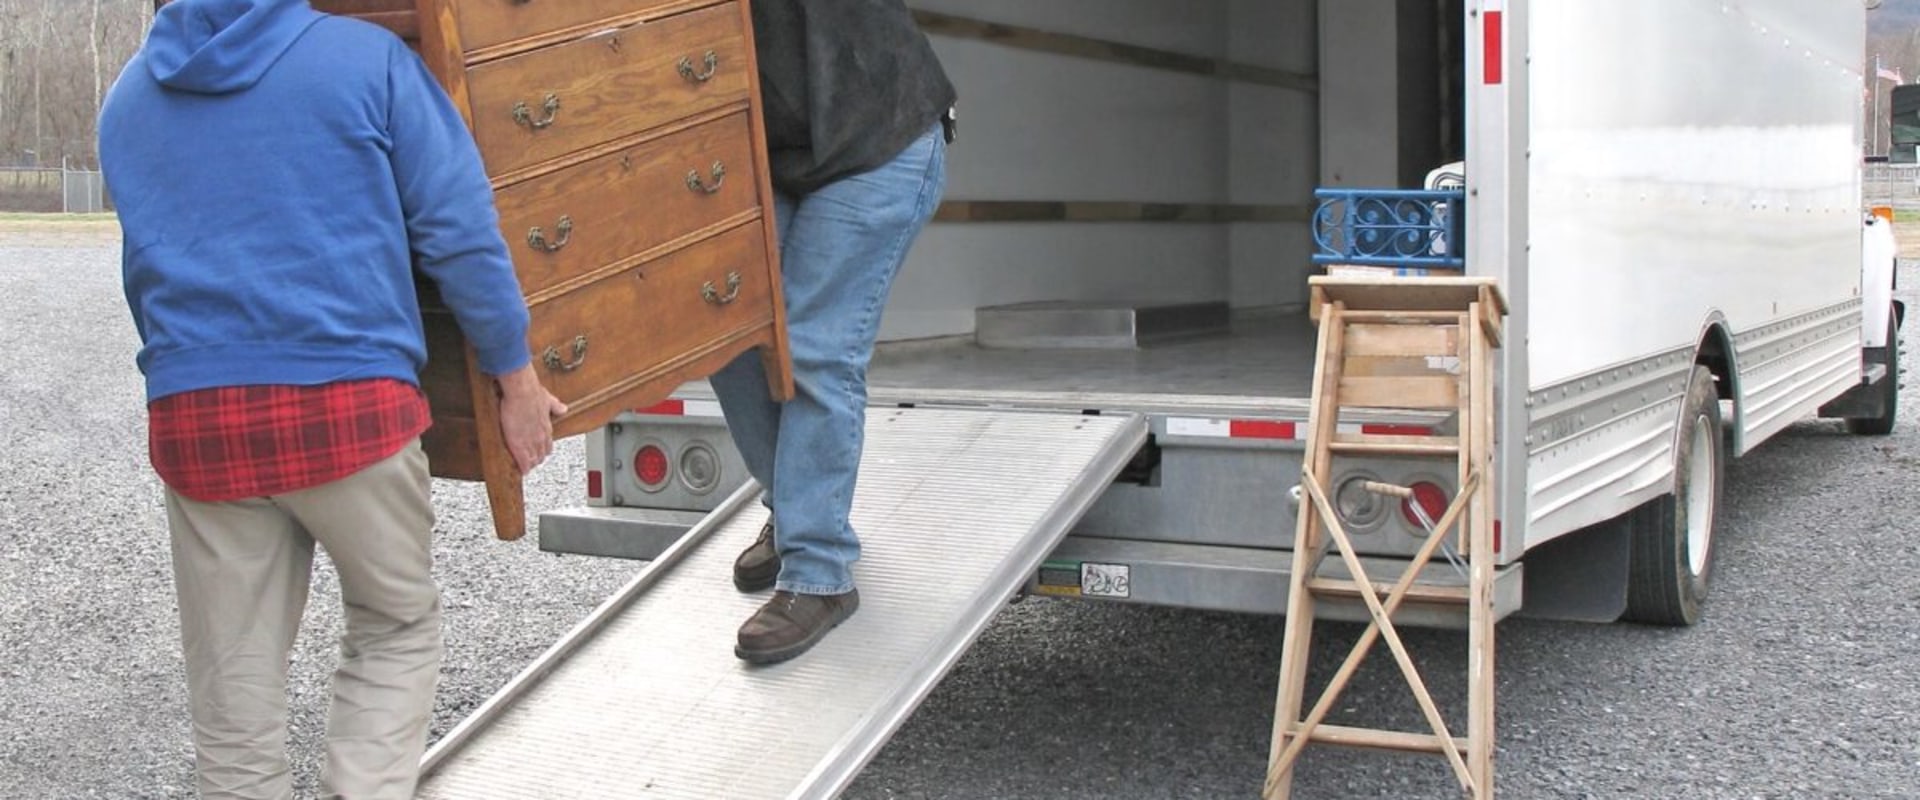 Is it faster to load or unload a moving truck?